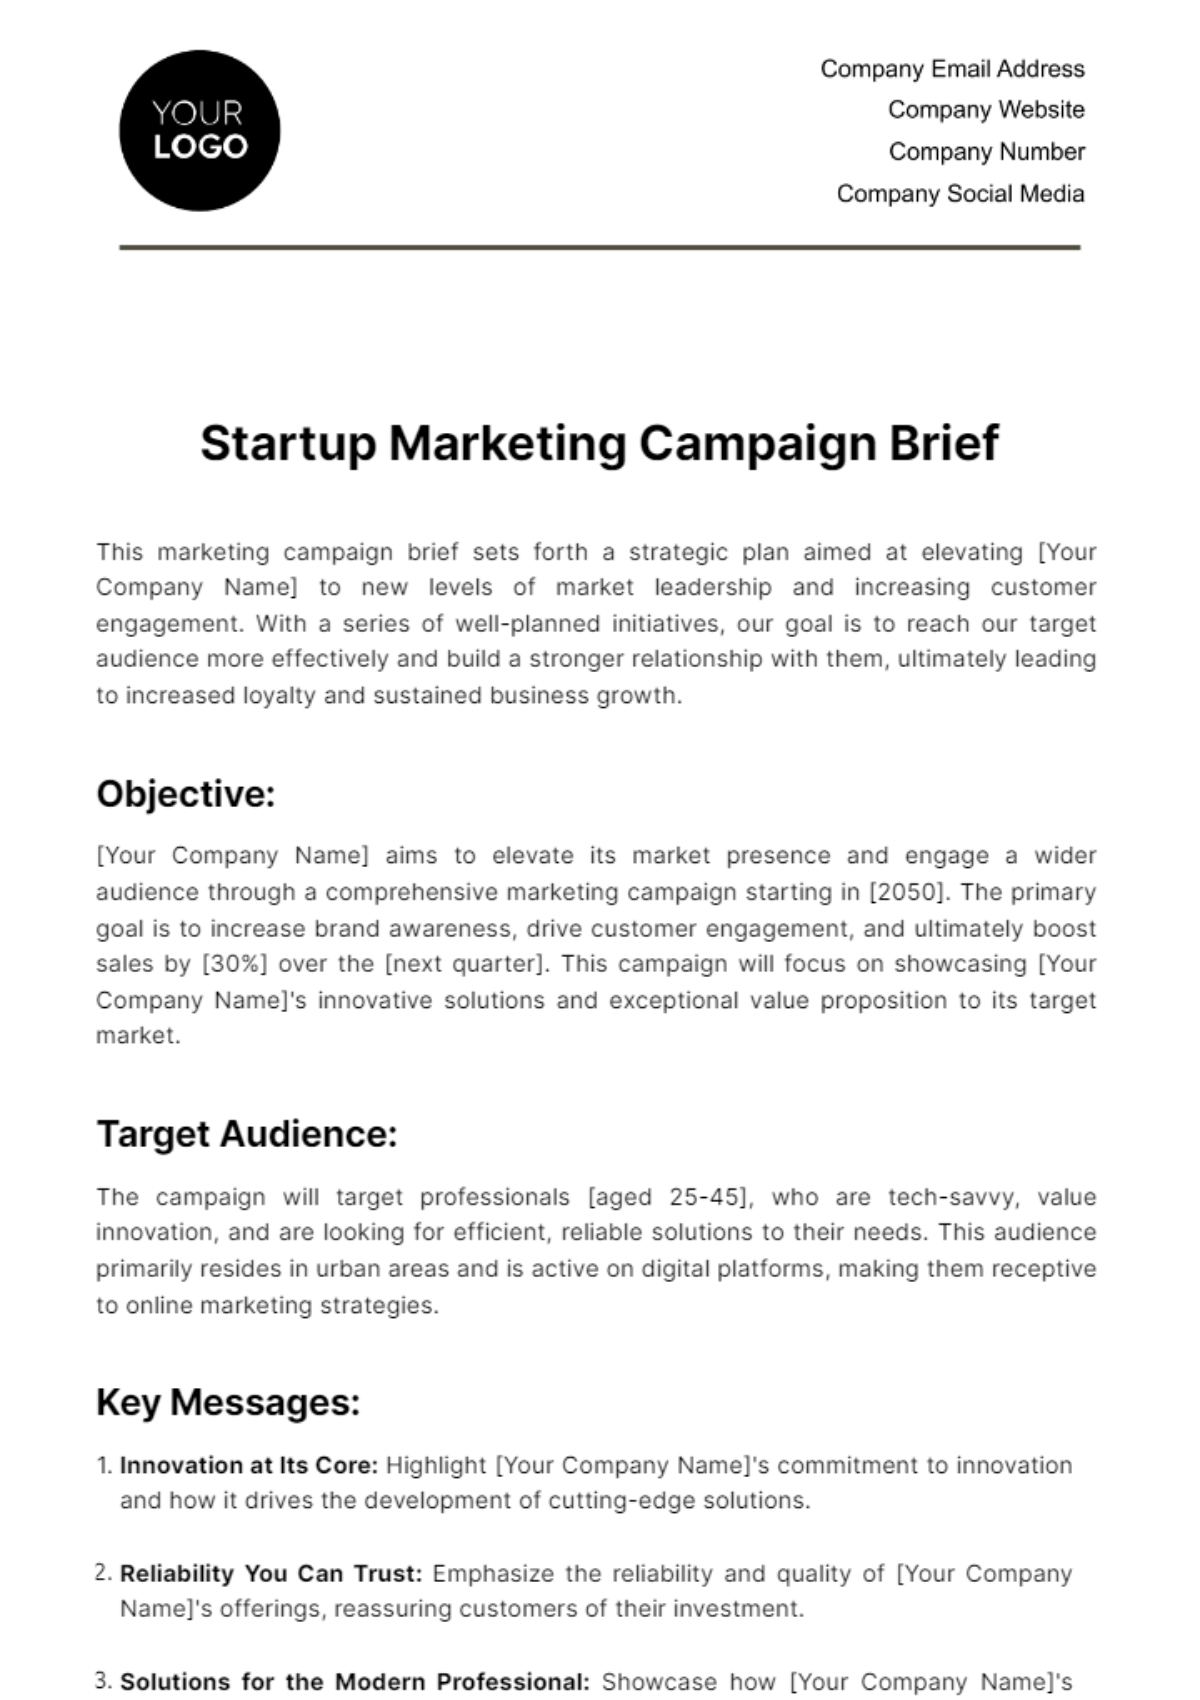 Free Startup Marketing Campaign Brief Template